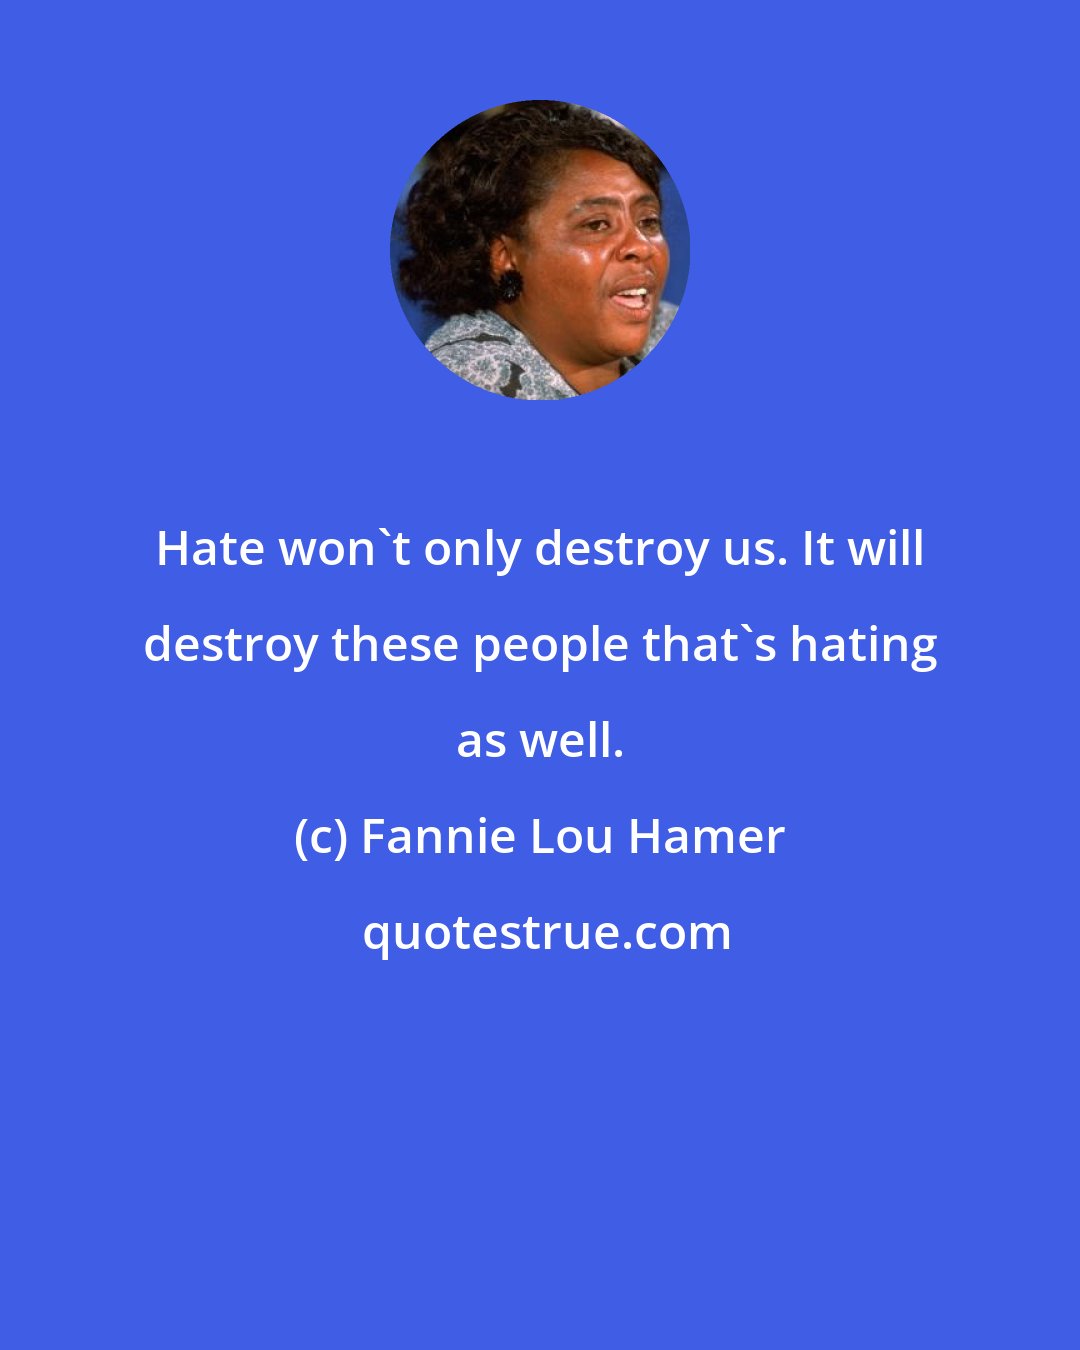 Fannie Lou Hamer: Hate won't only destroy us. It will destroy these people that's hating as well.